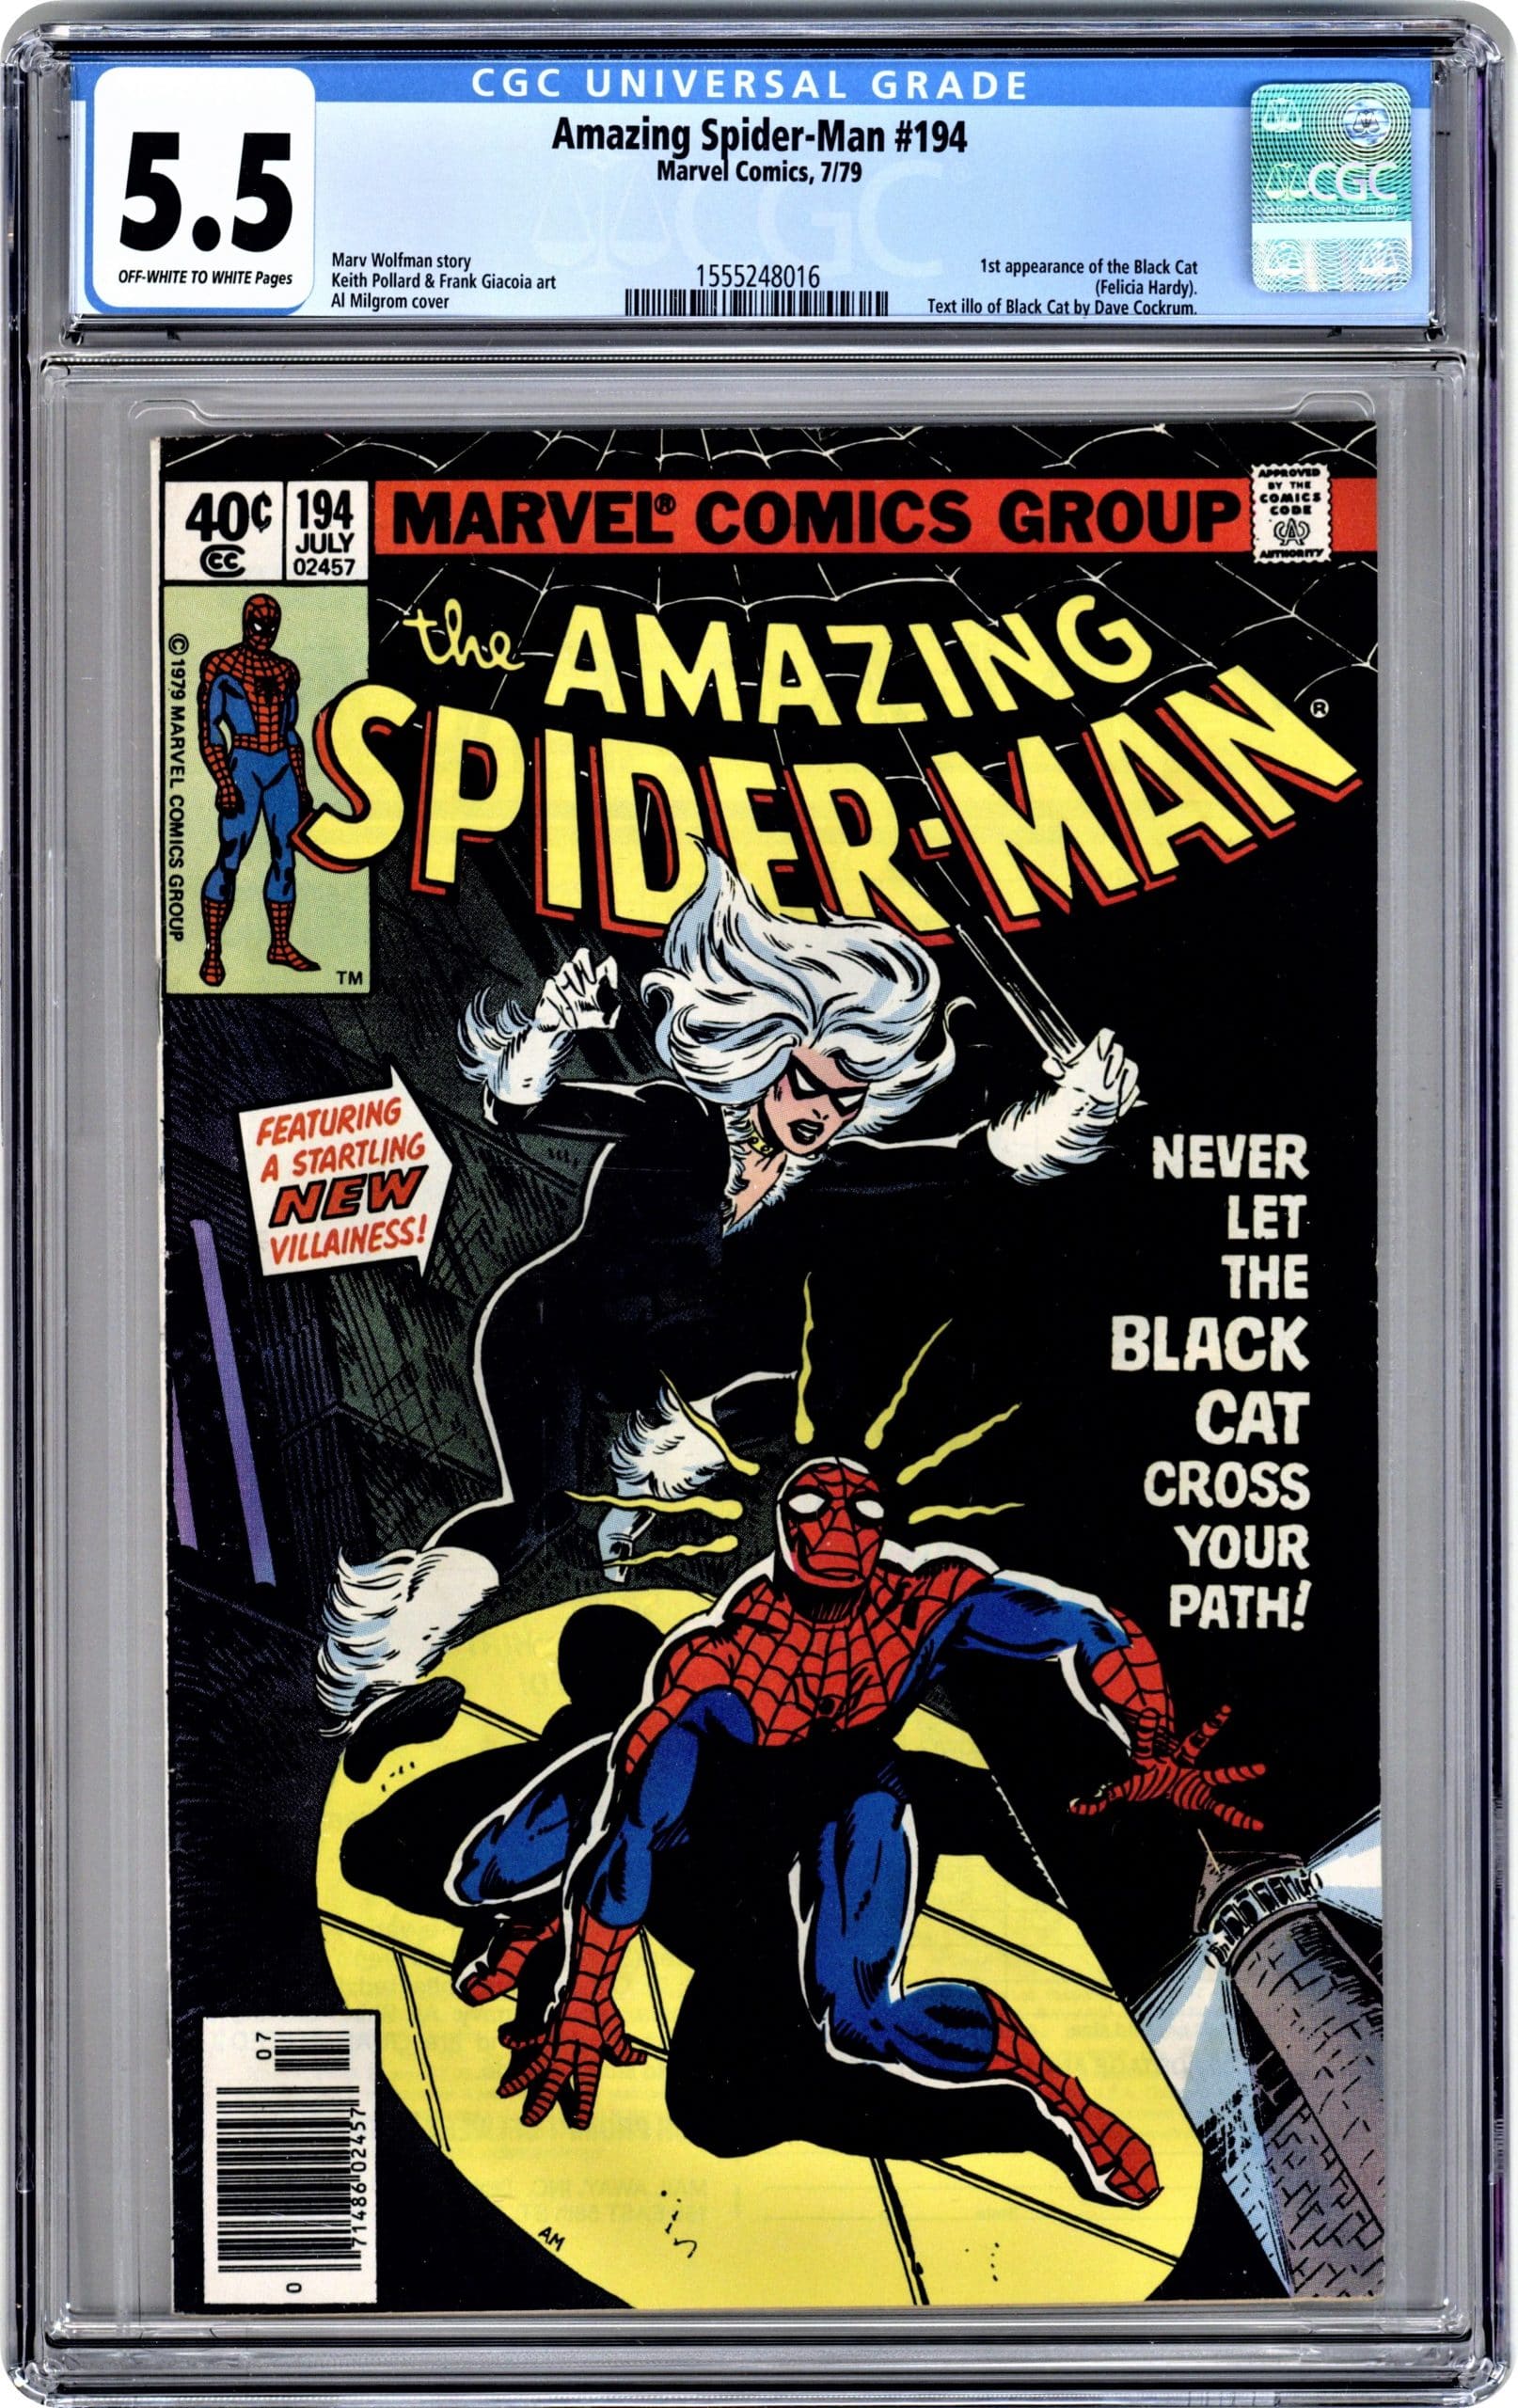 Comic books $20.00 or more, in grade VG or better, graded by CBCS